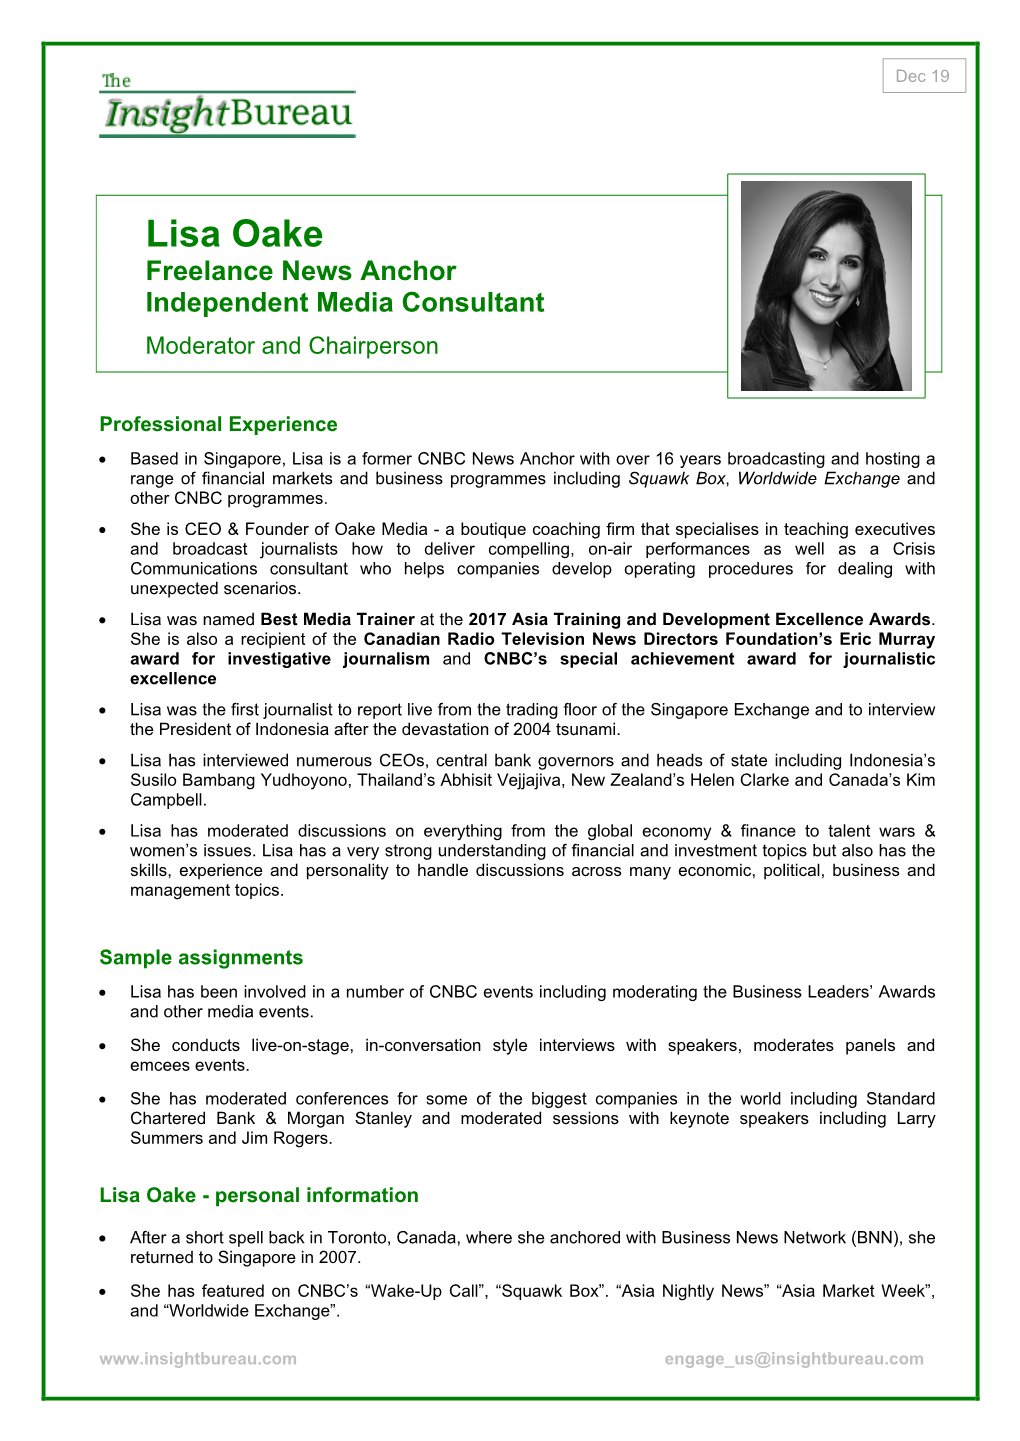 Lisa Oake Freelance News Anchor Independent Media Consultant